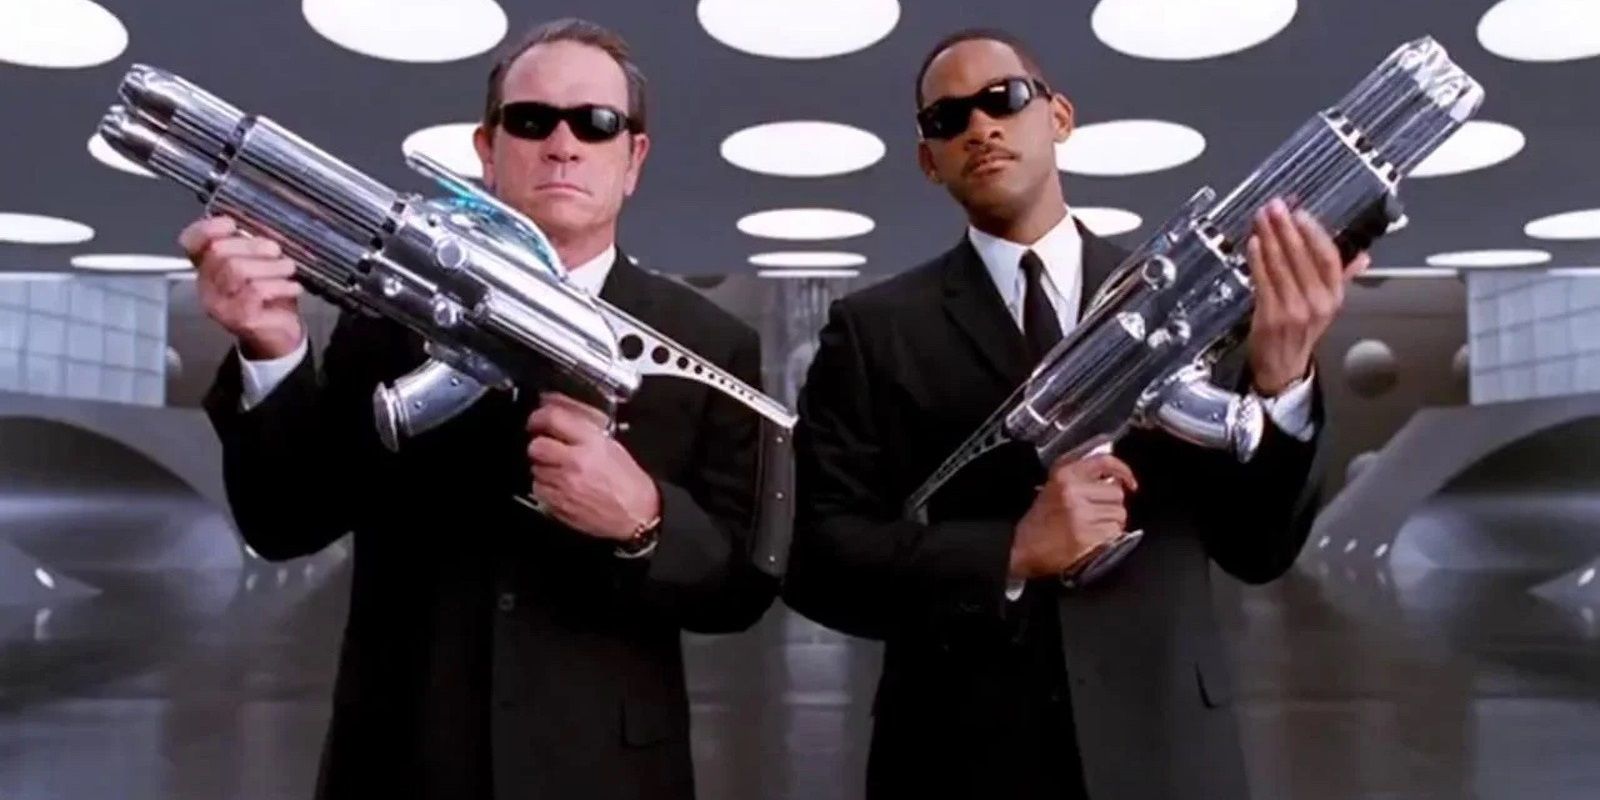 Agents J and K with huge guns in Men in Black